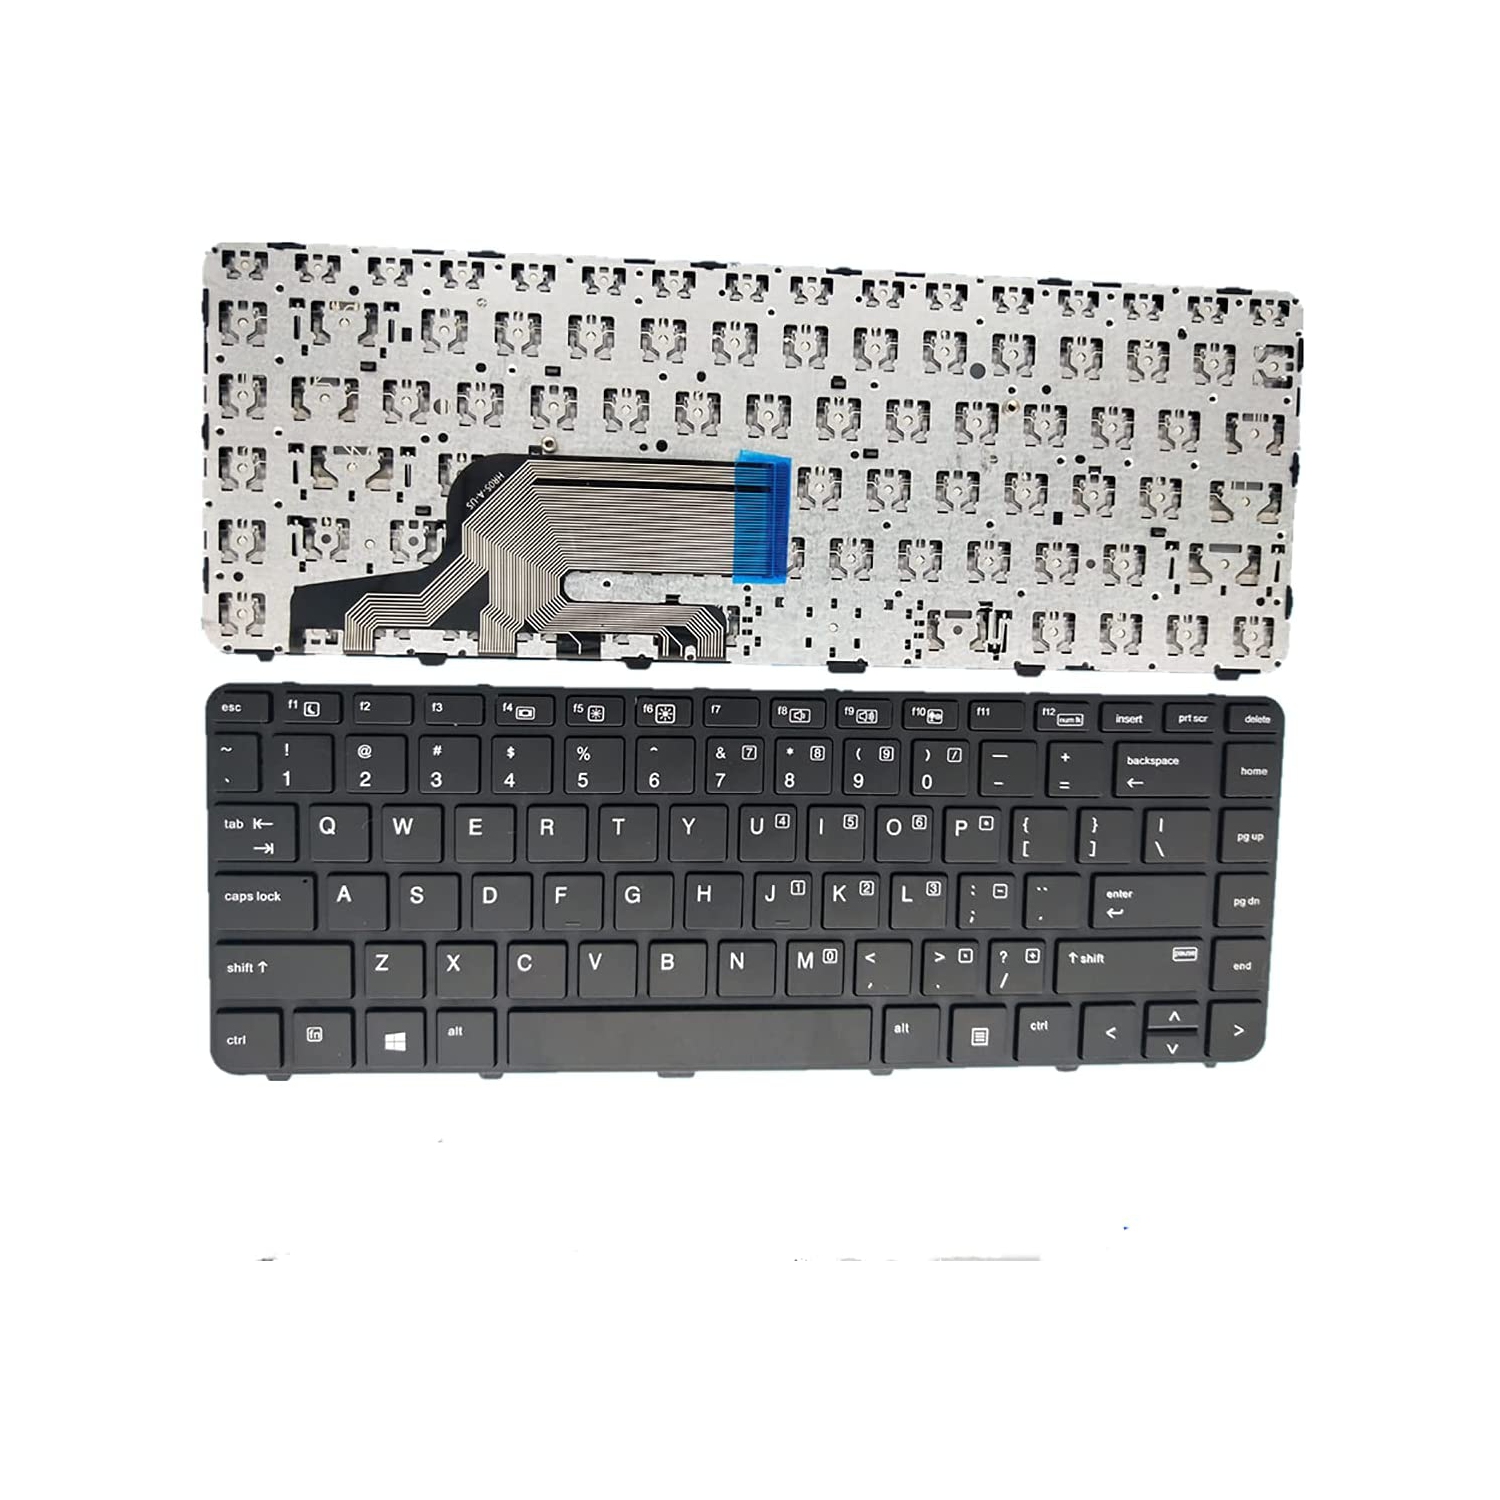 Laptop Replacement US Layout Keyboard for HP Probook 430 G3 440 G3 445 G3 640 G2 640 G3 Black